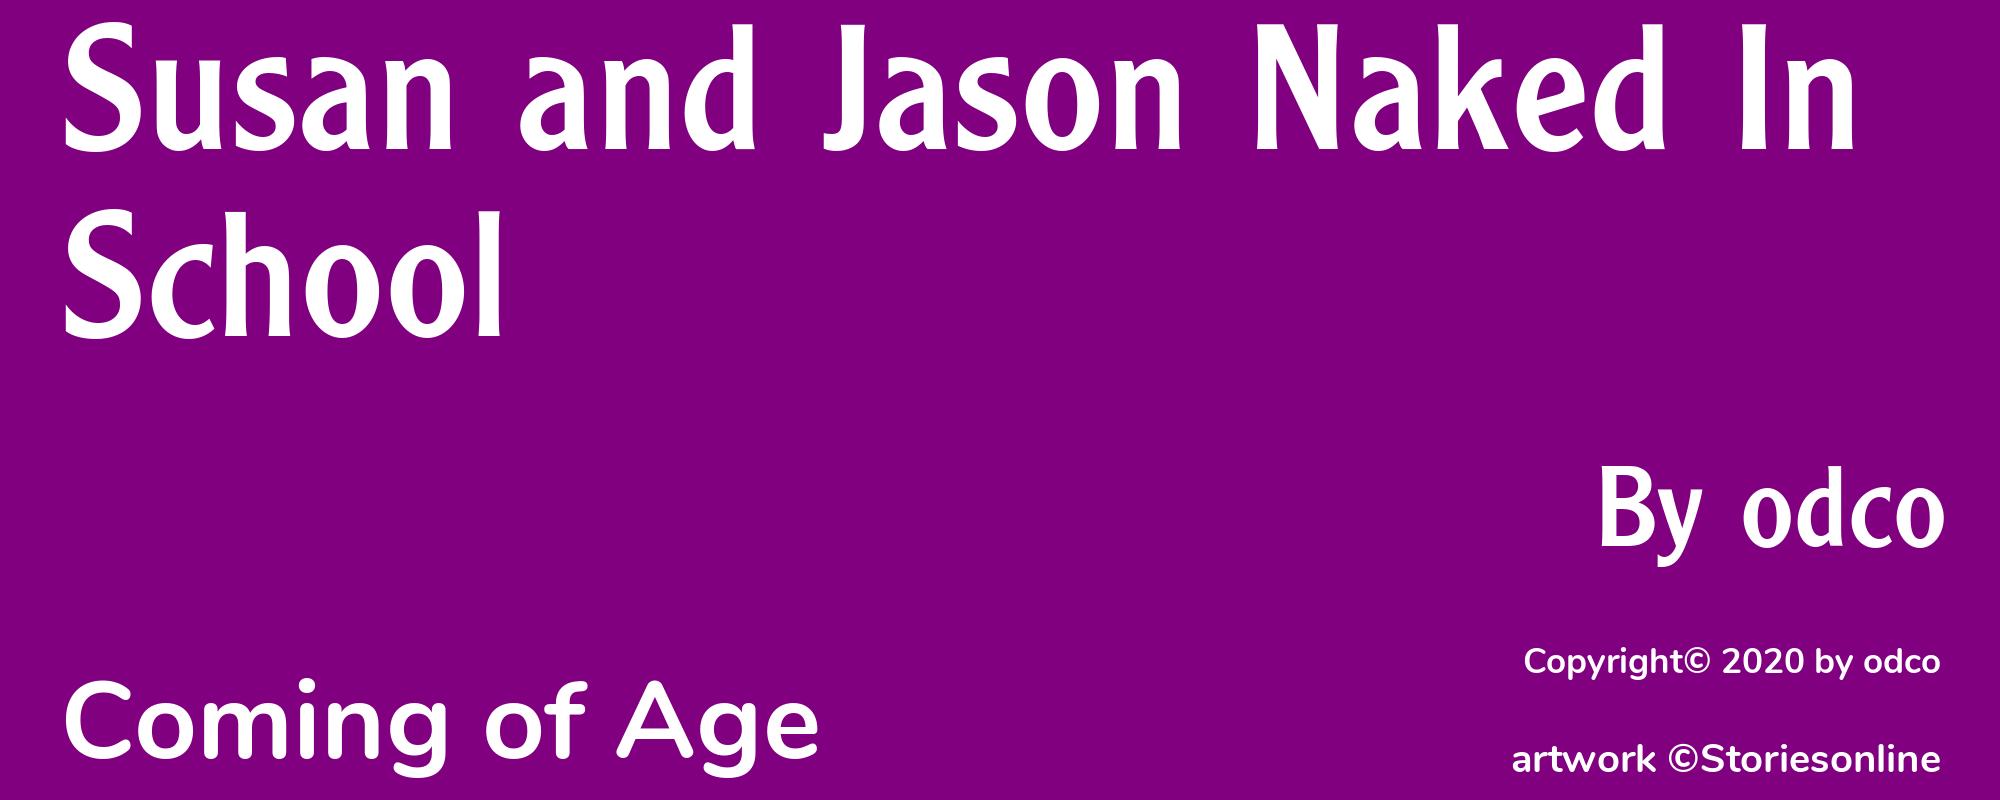 Susan and Jason Naked In School - Cover